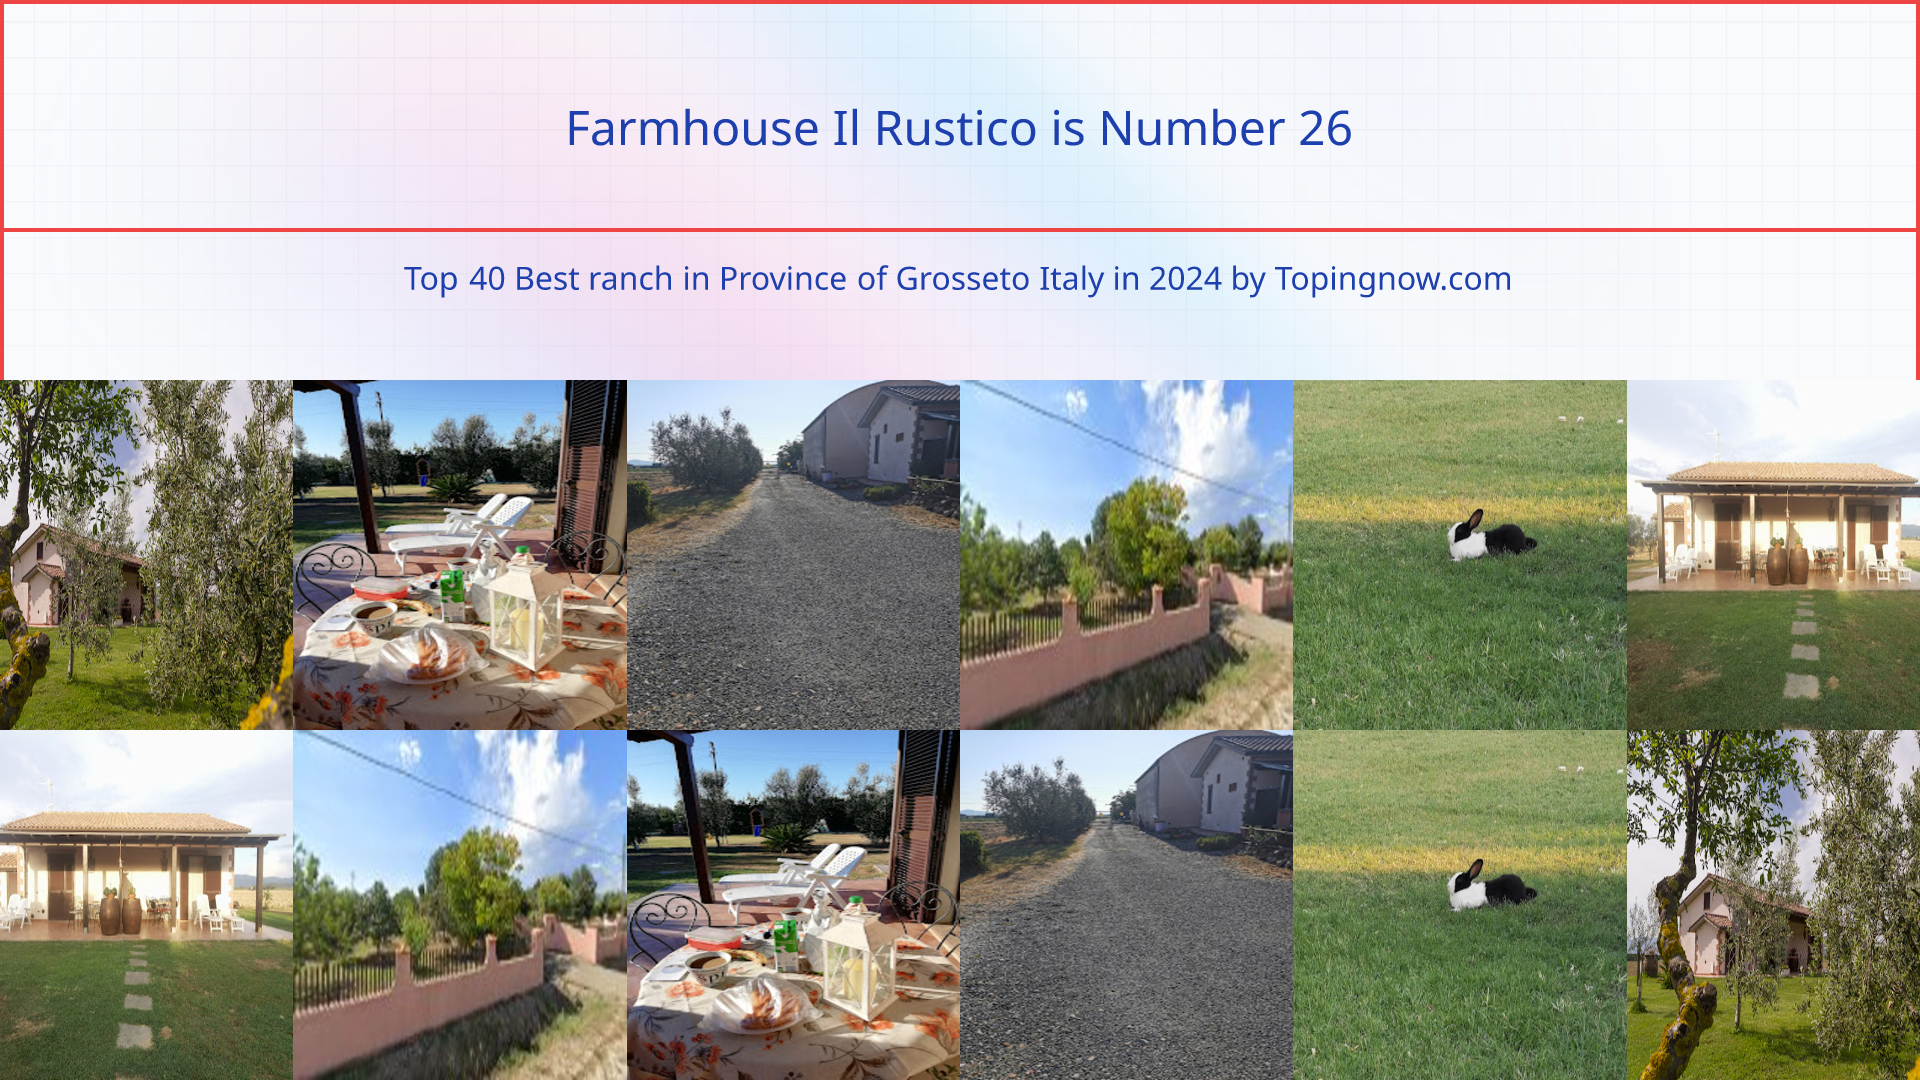 Farmhouse Il Rustico: Top 40 Best ranch in Province of Grosseto Italy in 2024